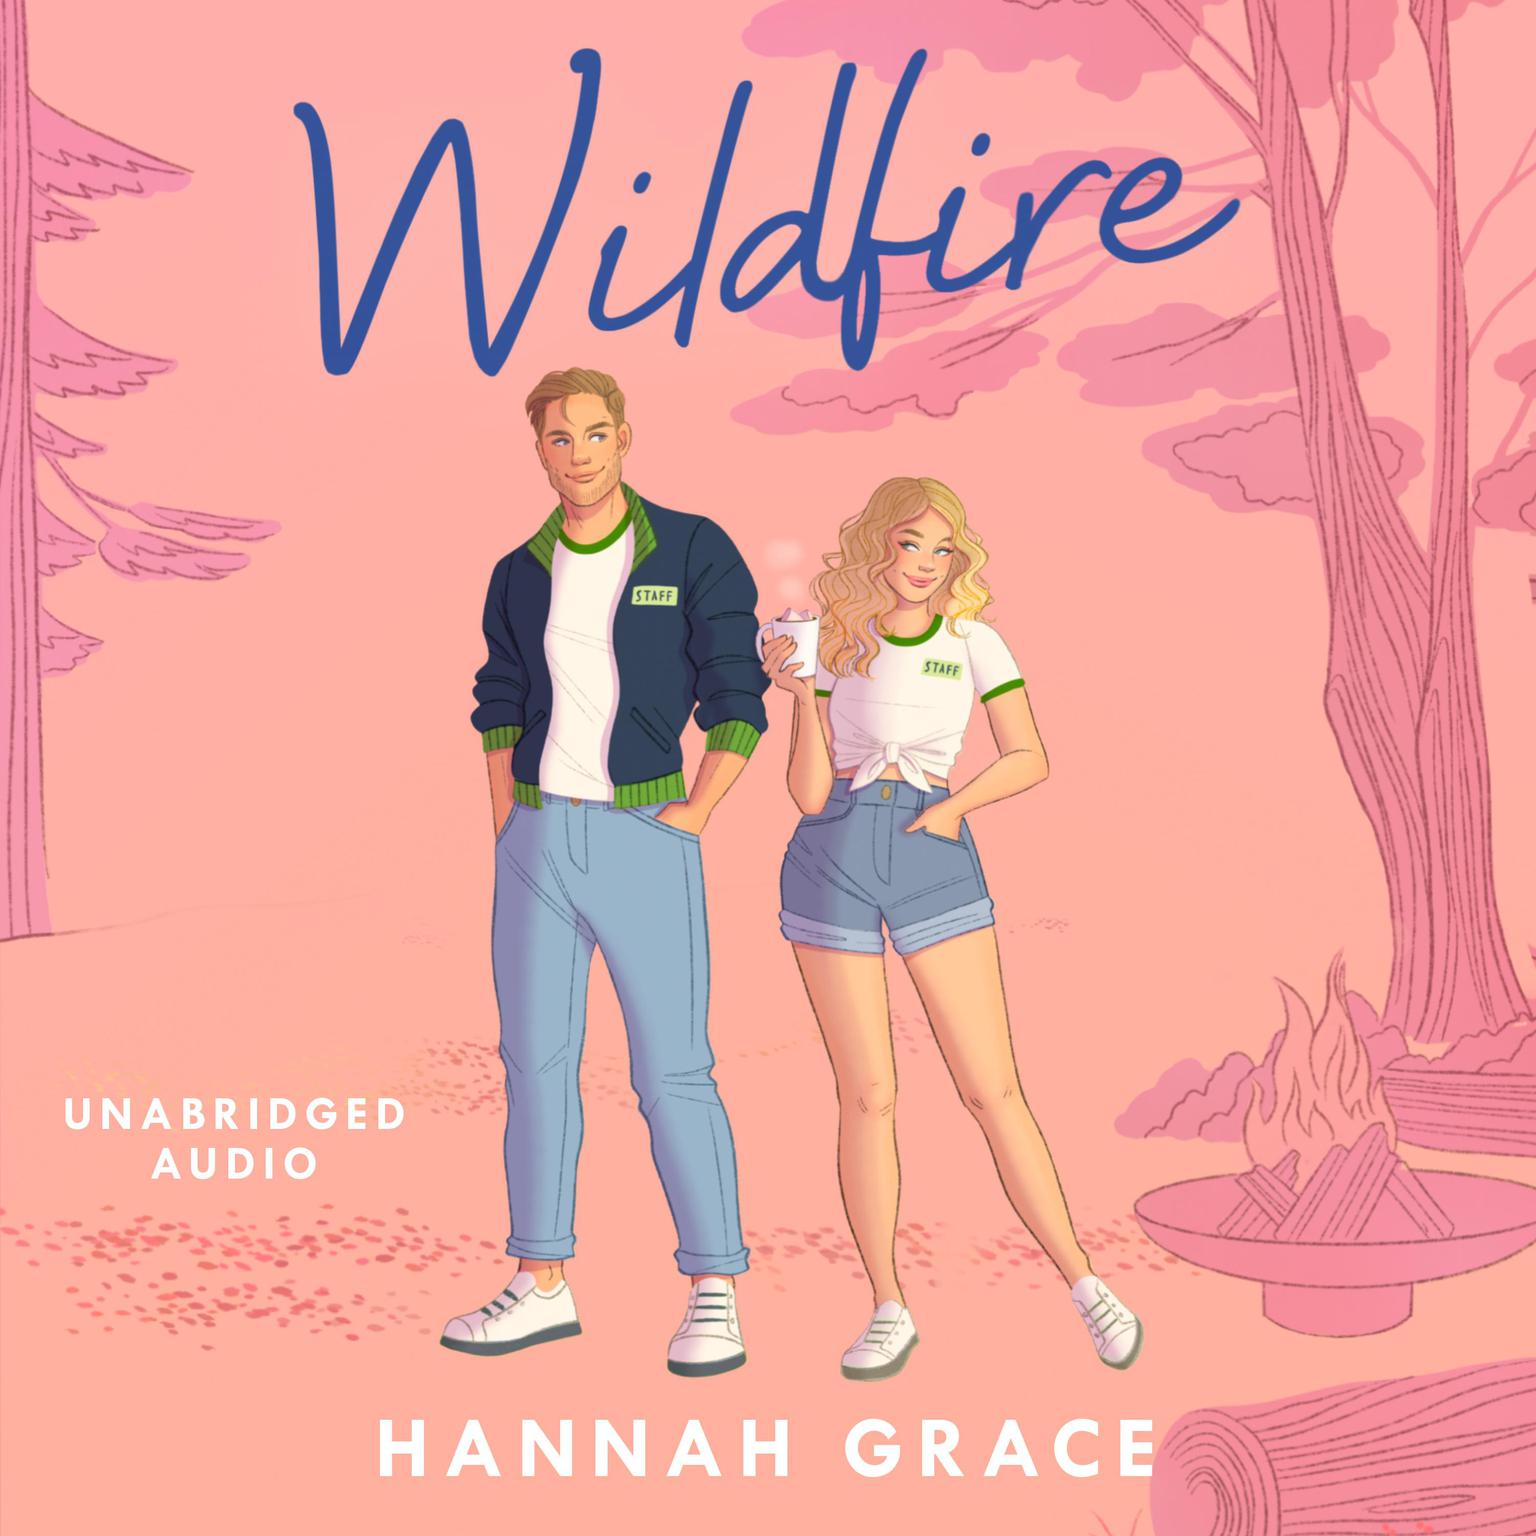 Wildfire: The Instant Global #1 and Sunday Times Bestseller Audiobook, by Hannah Grace